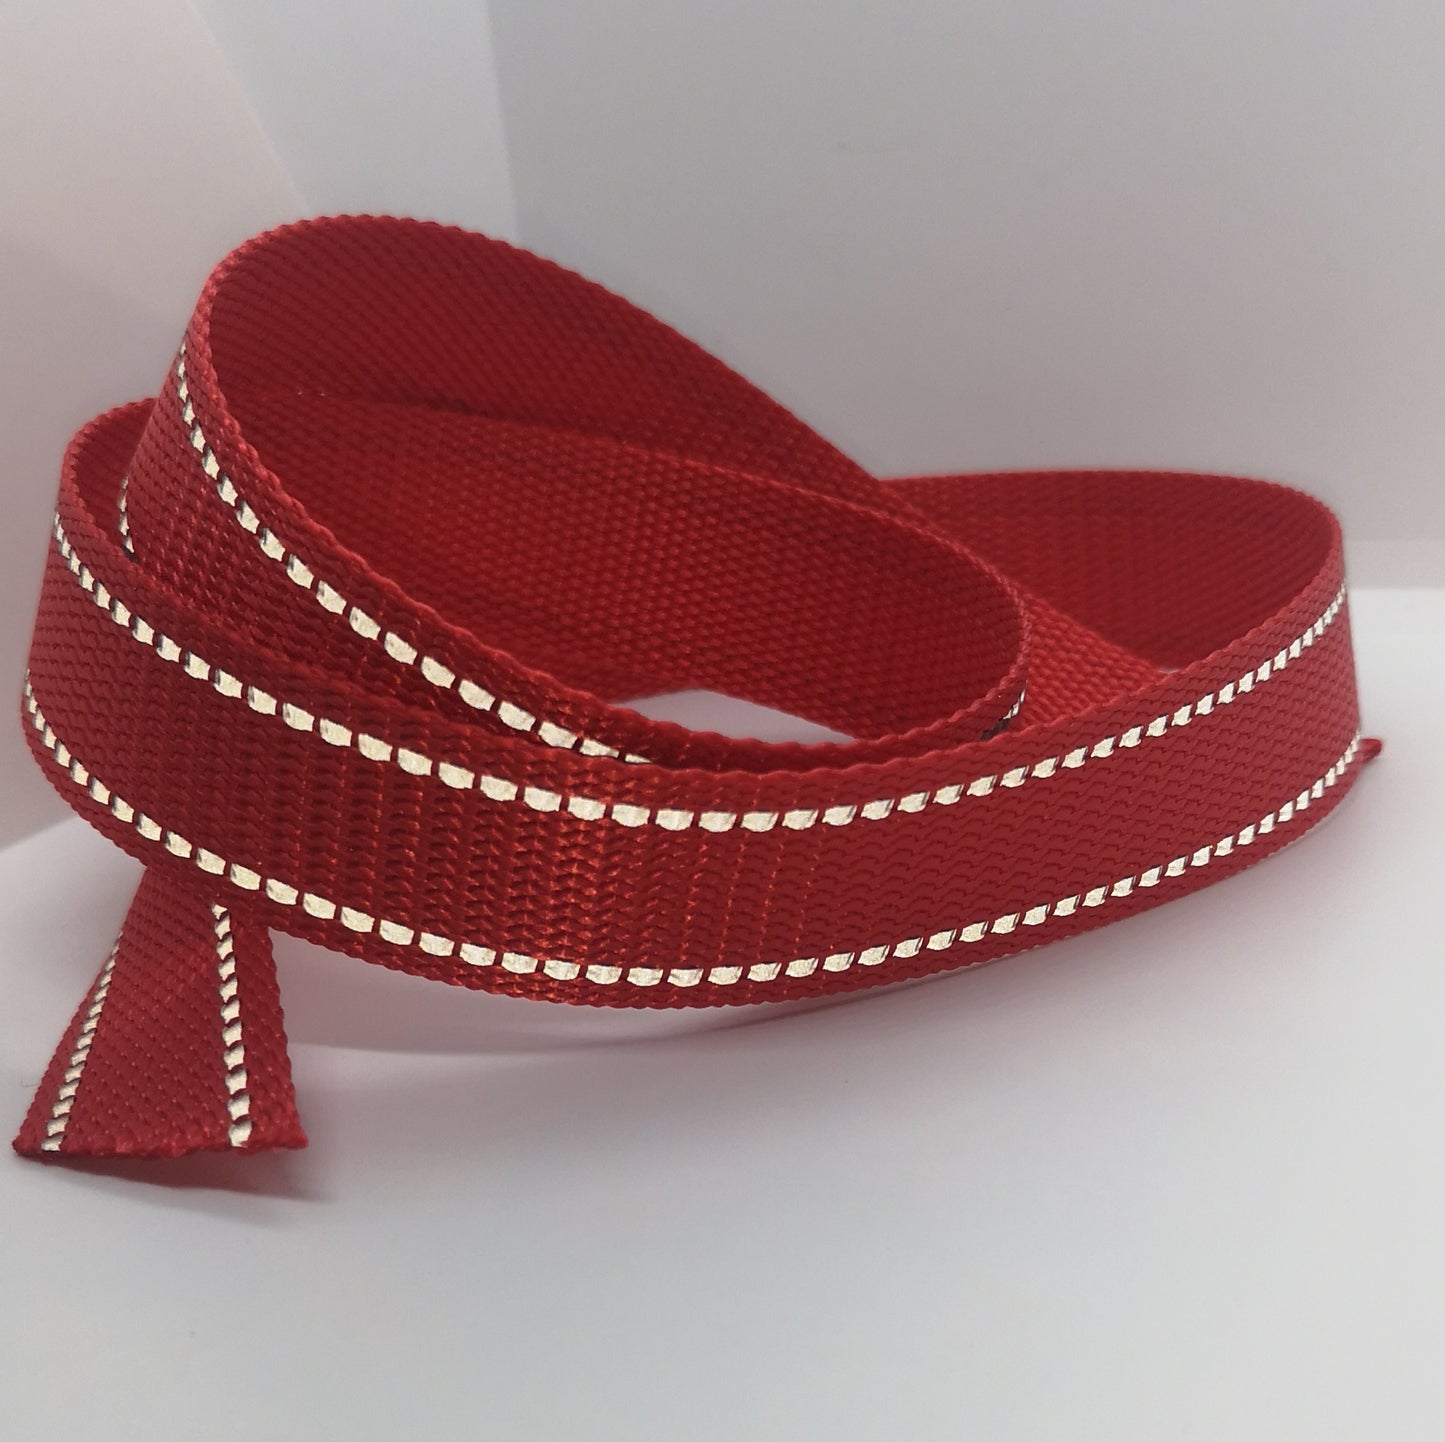 1" Wide Webbing - Solid Color with Reflective- RED